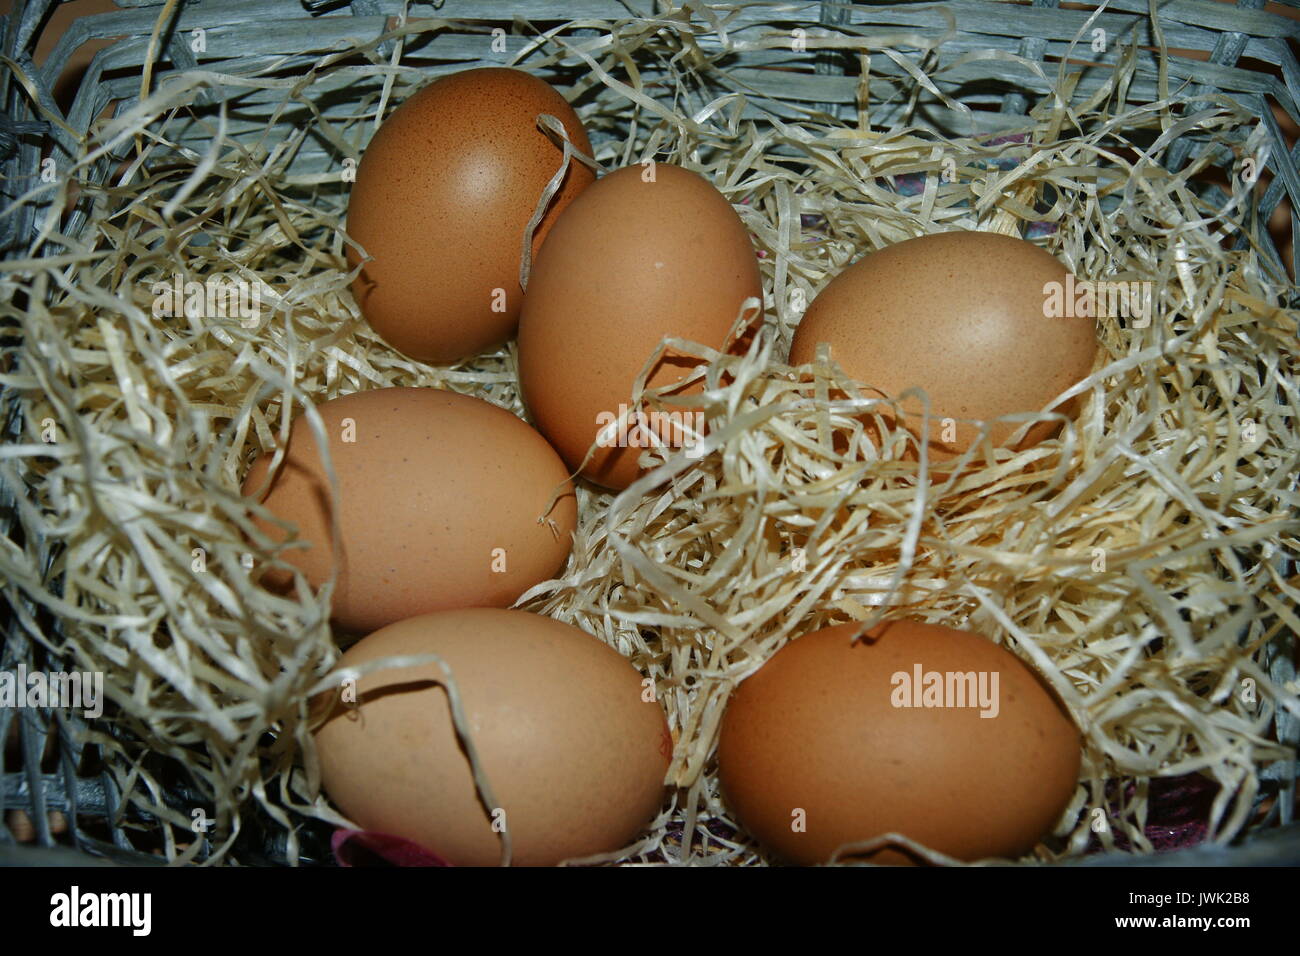 chickens eggs in a basket Stock Photo